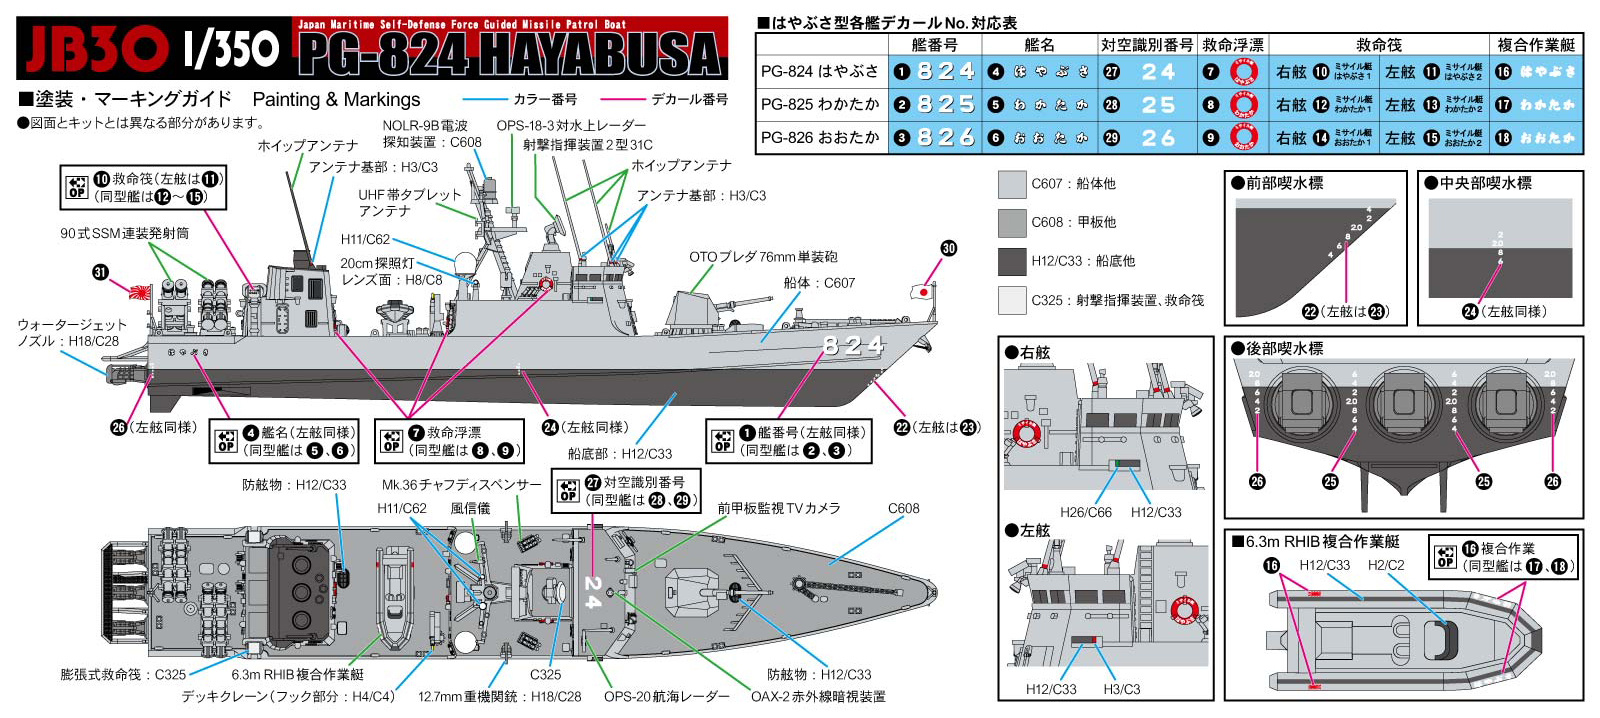 1/350 JMSDF Guided Missile Boat PG-824 Hayabusa with Photo-Etched Parts